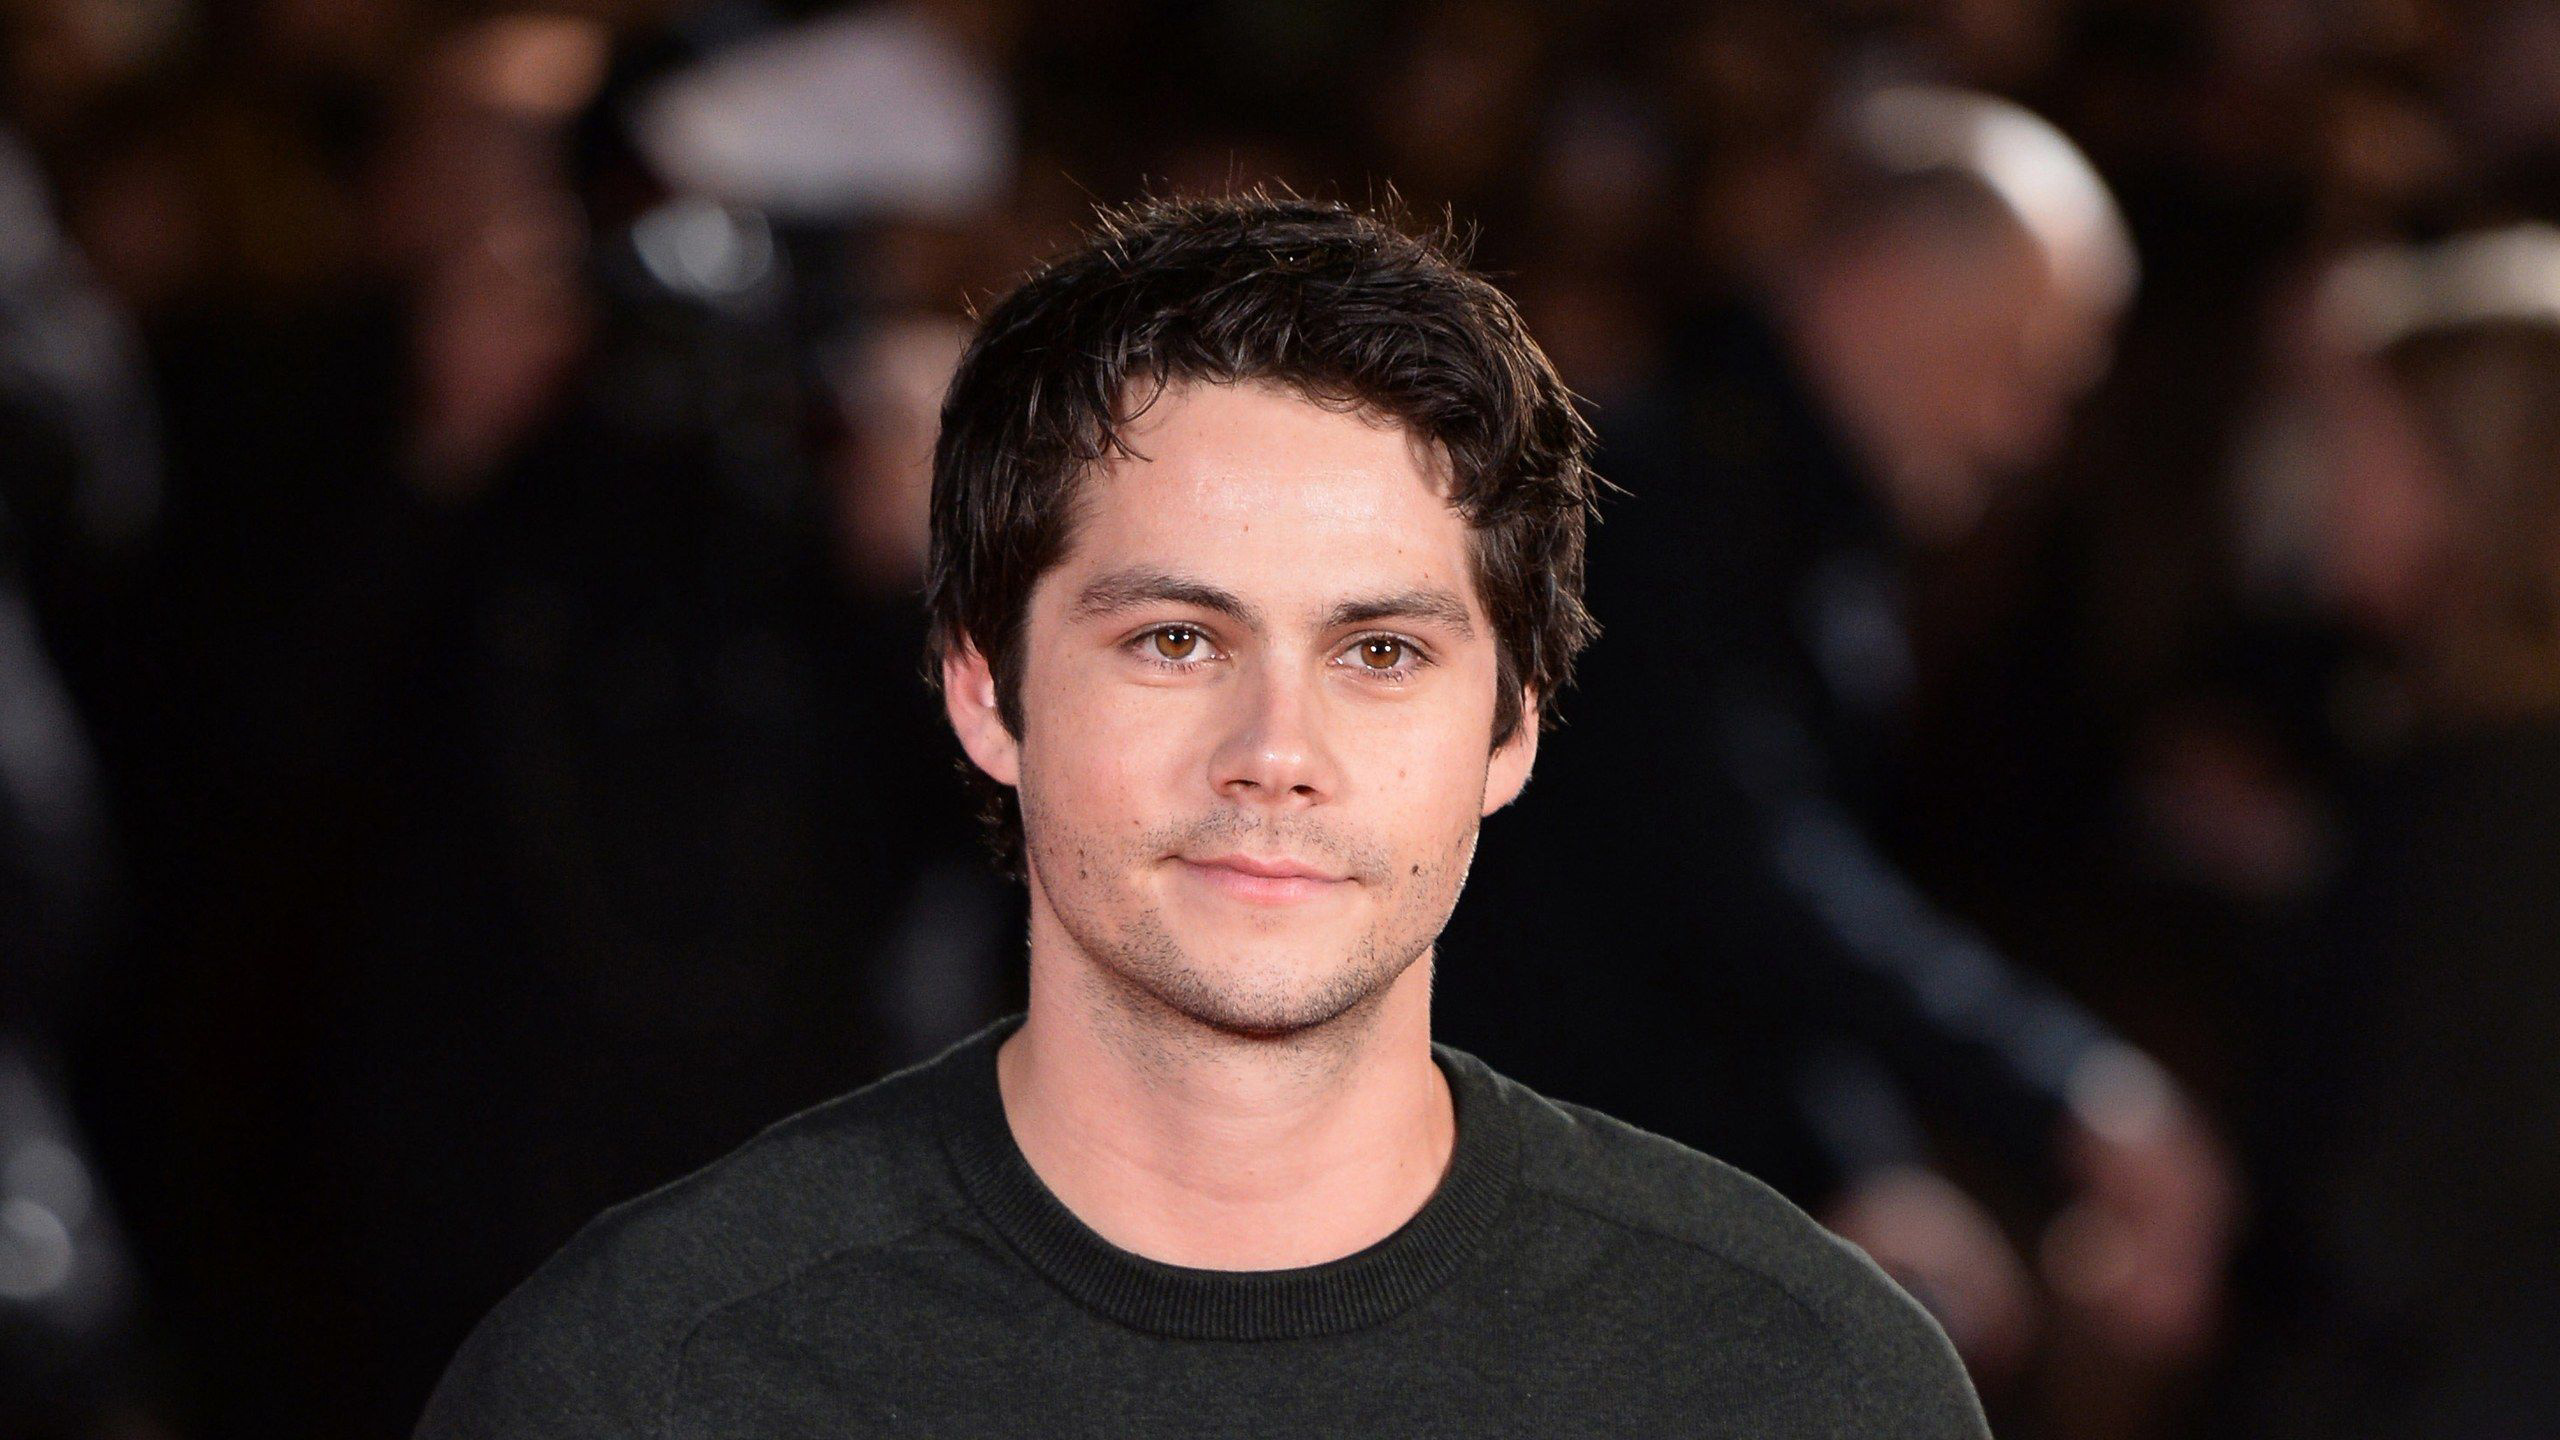 Dylan O'Brien Movies, Wallpapers to adore, Celeb-inspired backgrounds, Impressive visuals, 2560x1440 HD Desktop